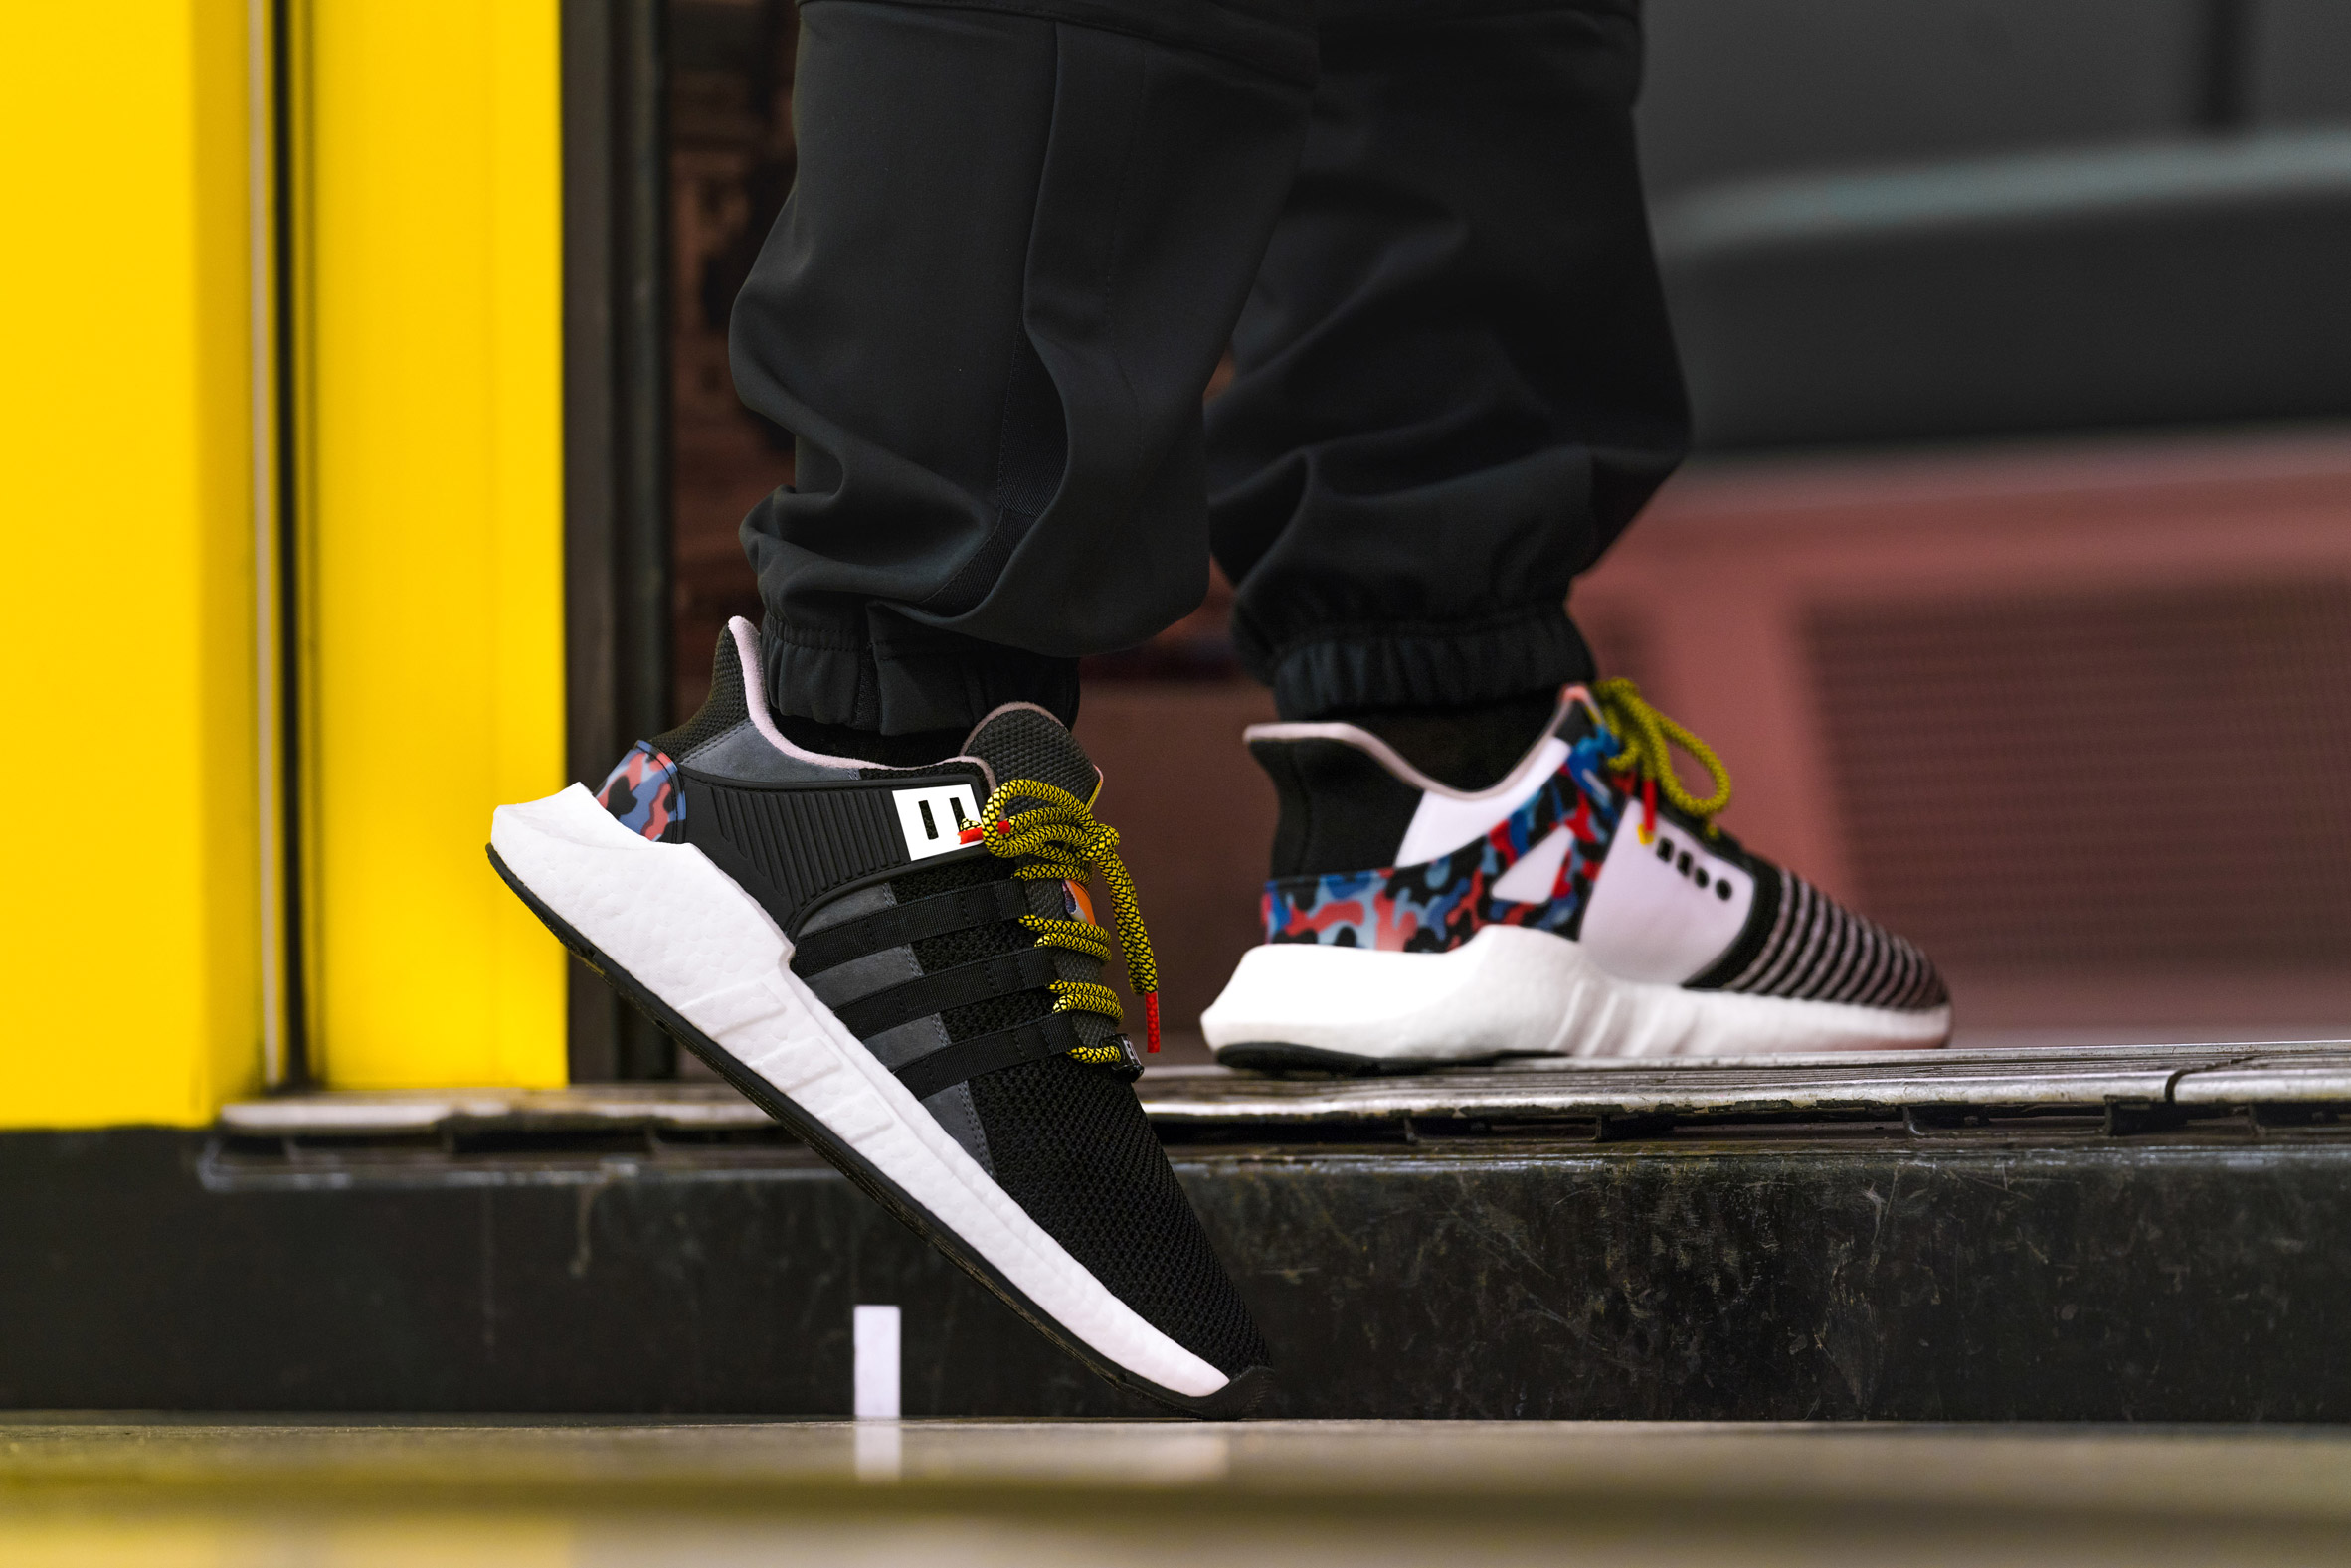 overdrijven Dierentuin s nachts Noord Amerika Adidas releases limited-edition trainers that match Berlin subway seats